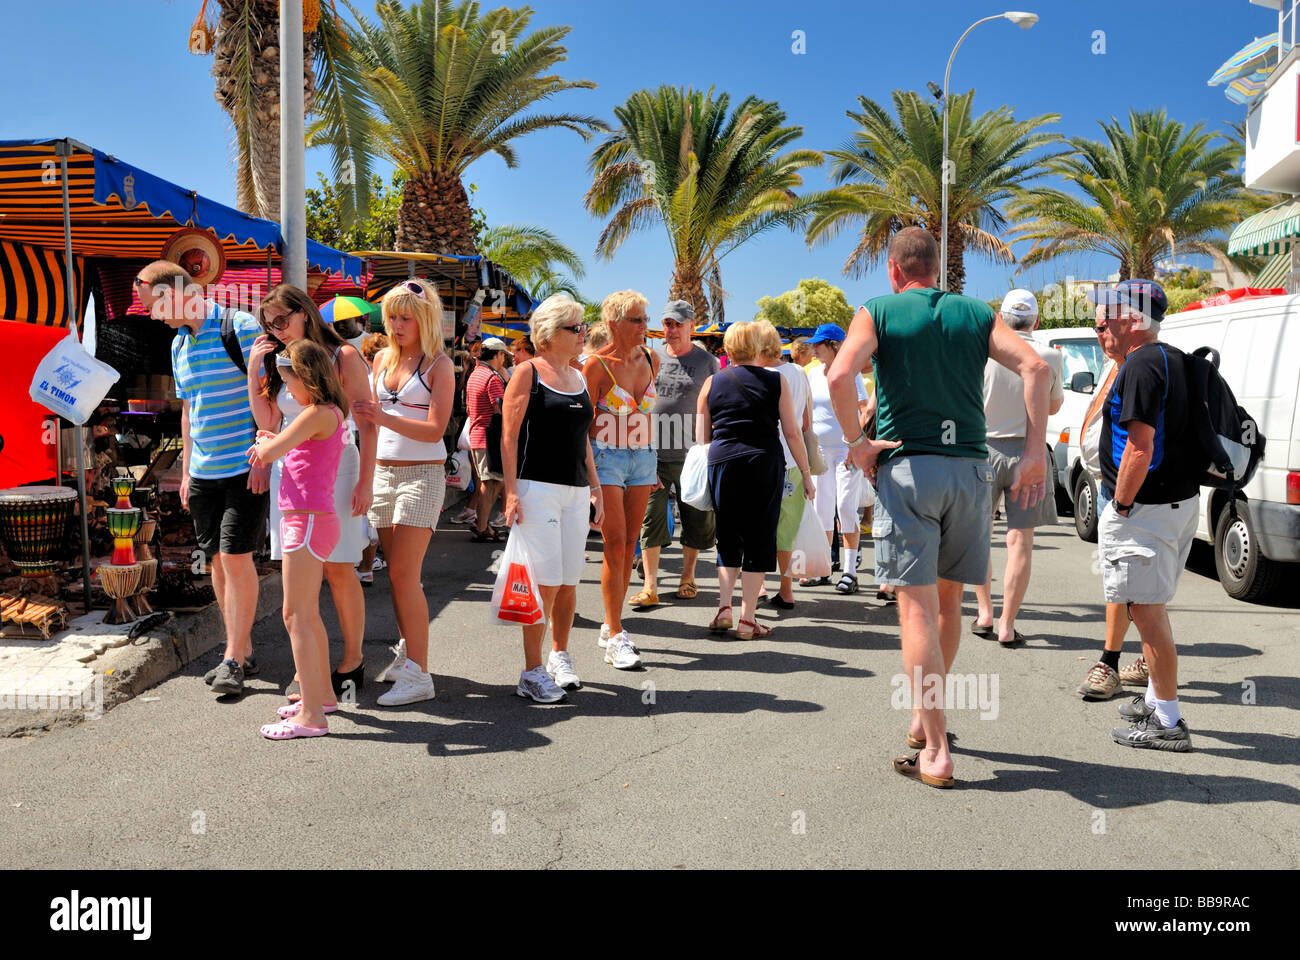 The tuesday market in Arguineguin village, Gran Canaria, Canary Islands, Spain, Europe. Stock Photo